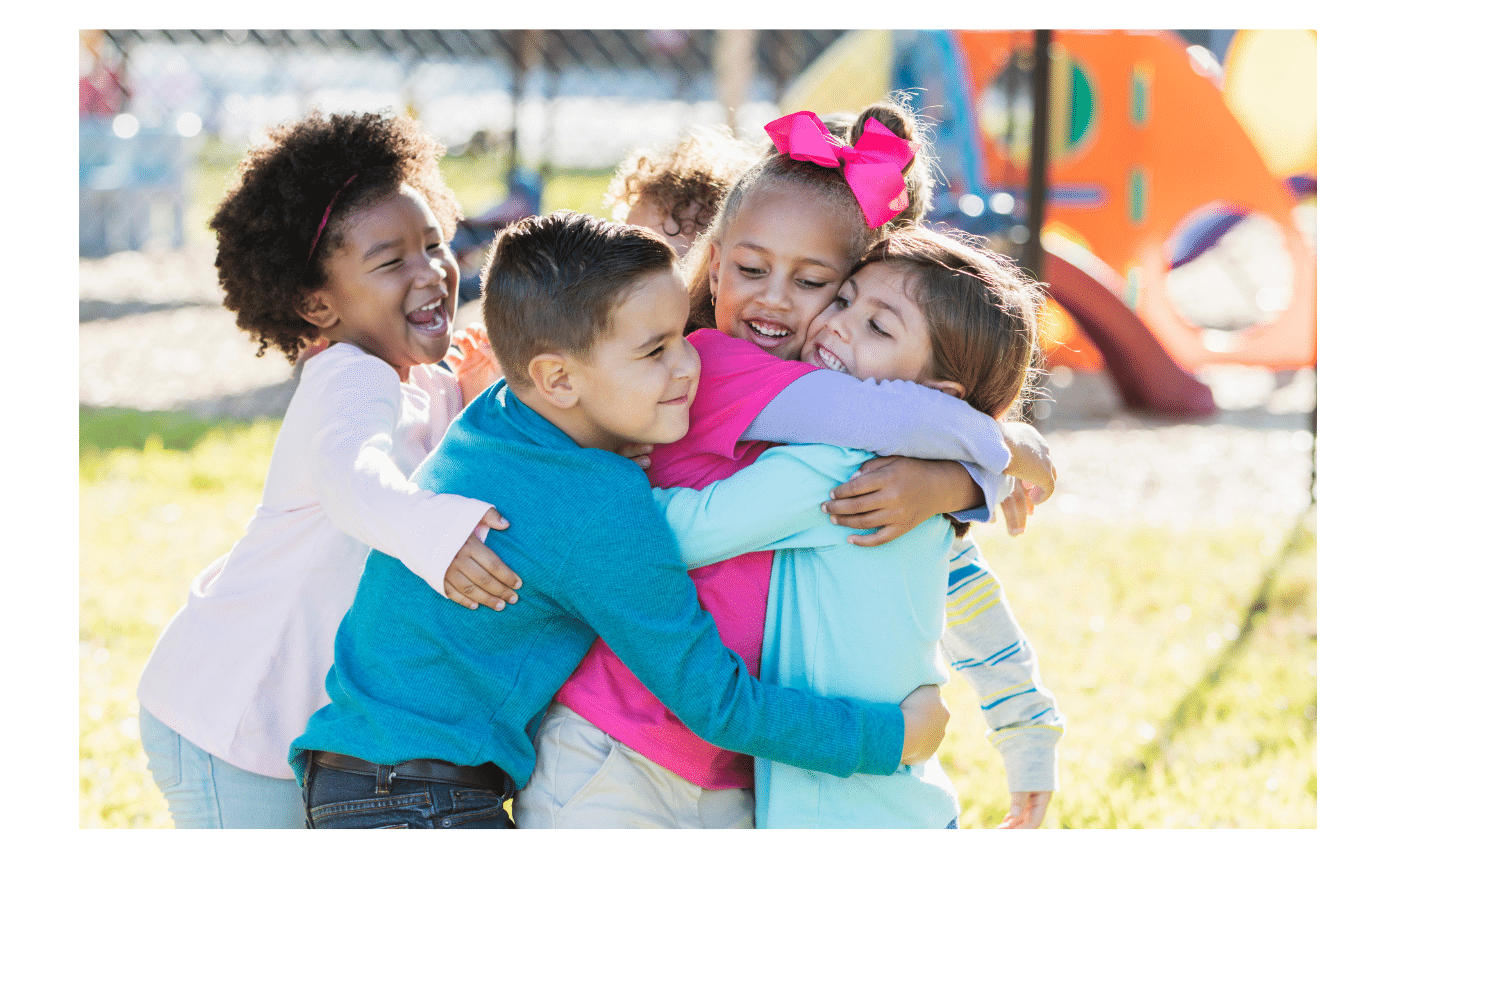 children hugging each other on the playground